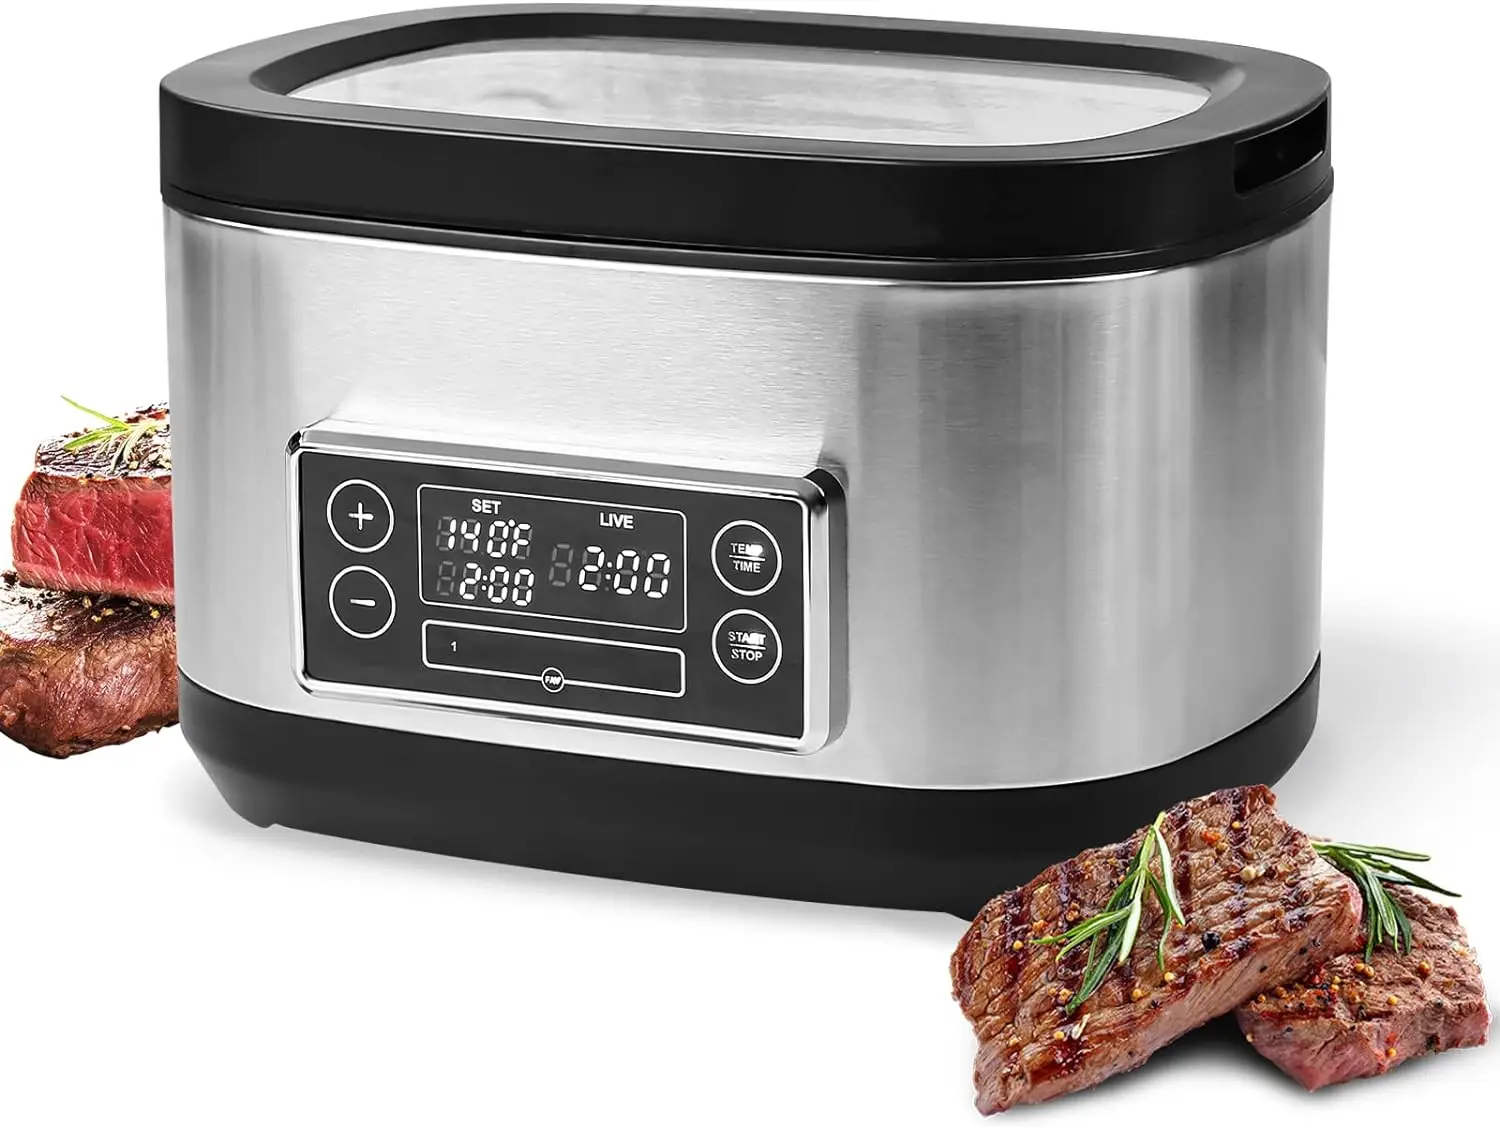 

Vide Machine, Sous Vide Precision Cooker, 8 Quart Sous Vide Cooker with LED Touchscreen,Stainless Steel Ultra-quiet Fast-Heating